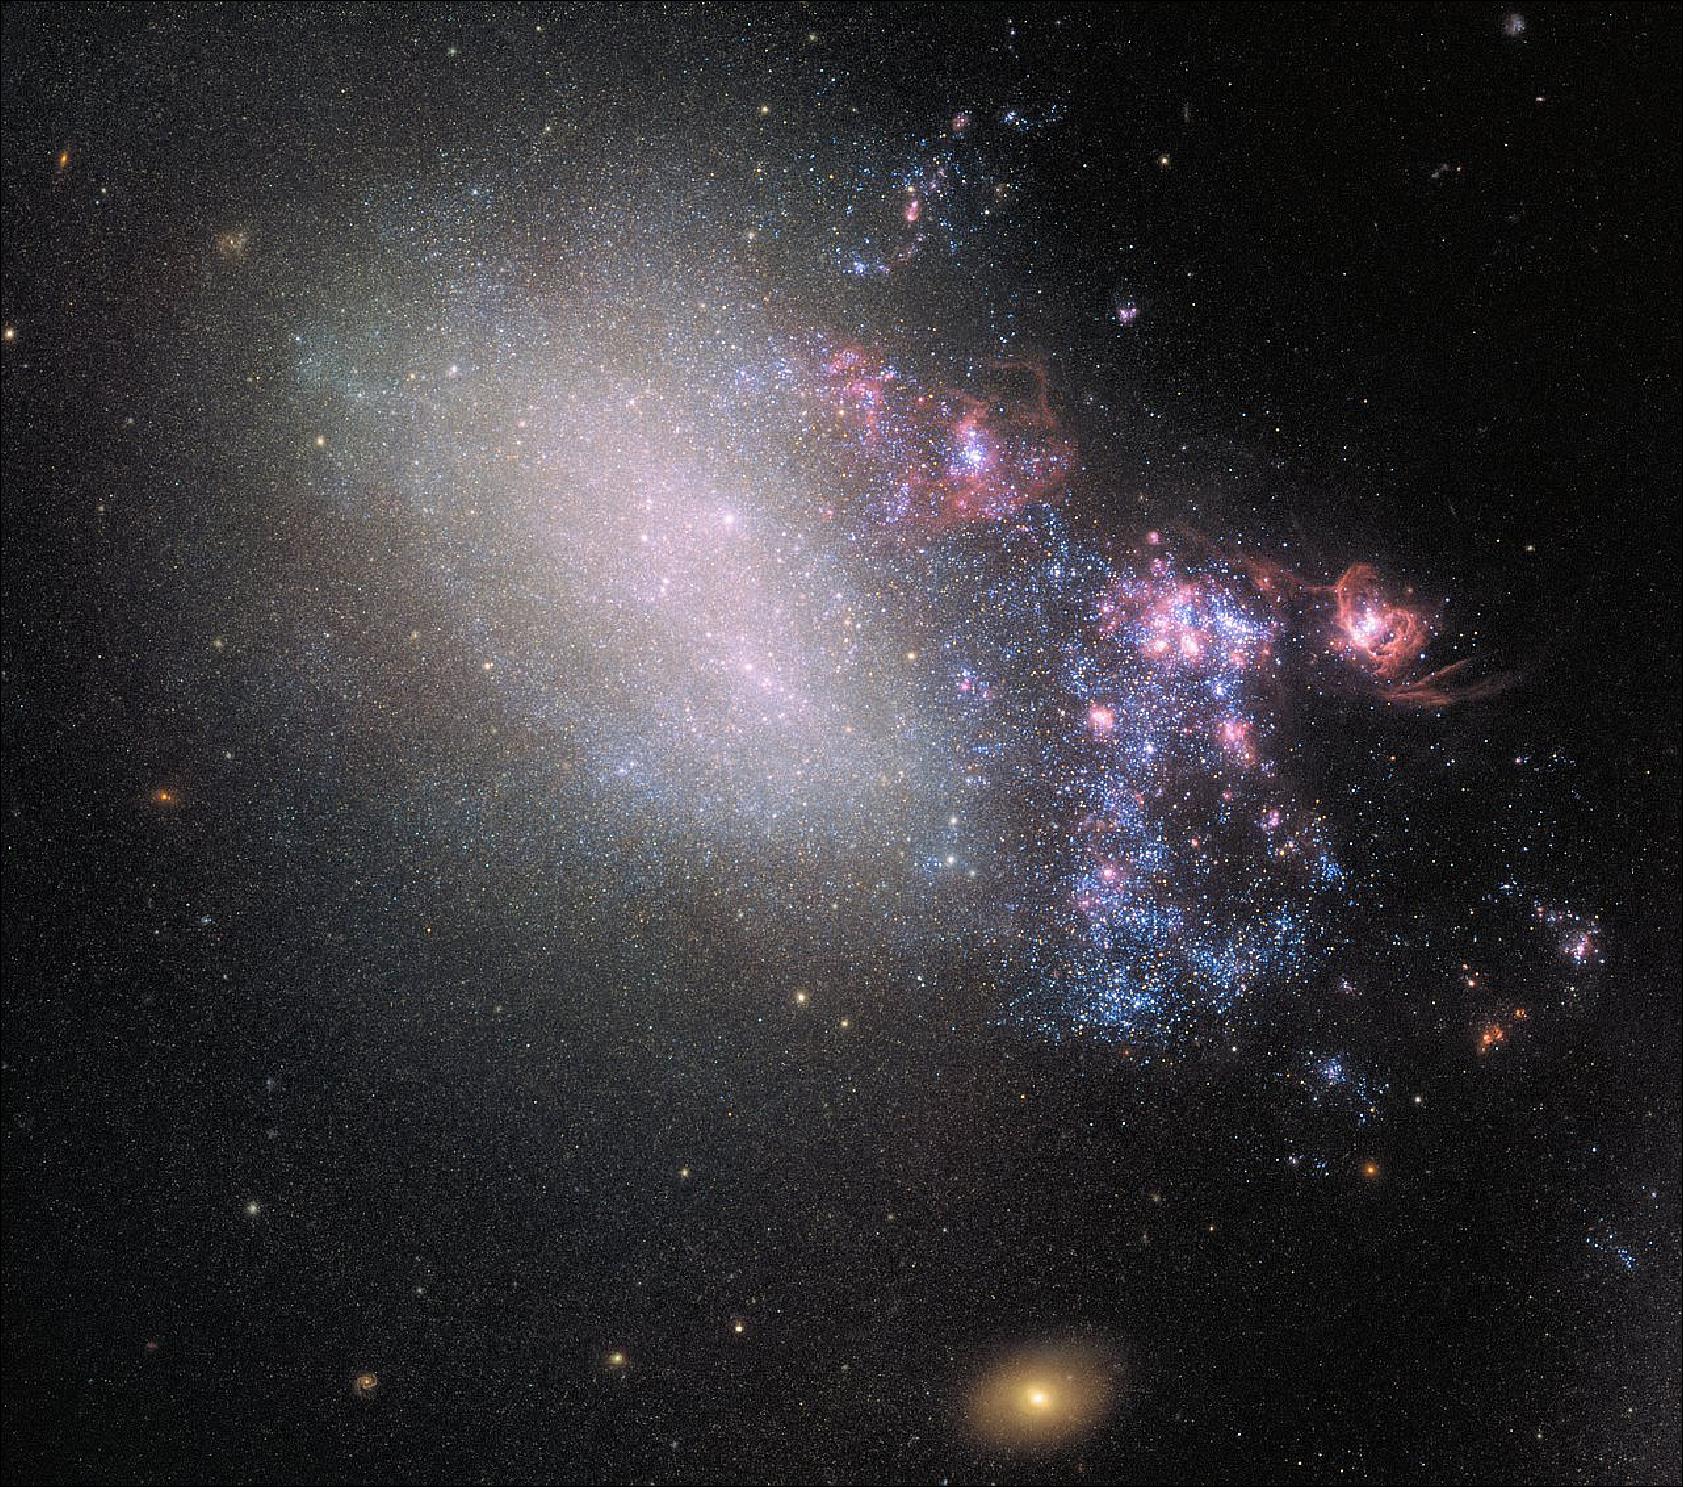 Figure 48: The NASA/ESA Hubble Space Telescope has taken a new look at the spectacular irregular galaxy NGC 4485, which has been warped and wound by its larger galactic neighbor. The gravity of the second galaxy has disrupted the ordered collection of stars, gas and dust, giving rise to an erratic region of newborn, hot, blue stars and chaotic clumps and streams of dust and gas (image credit: ESA, NASA)